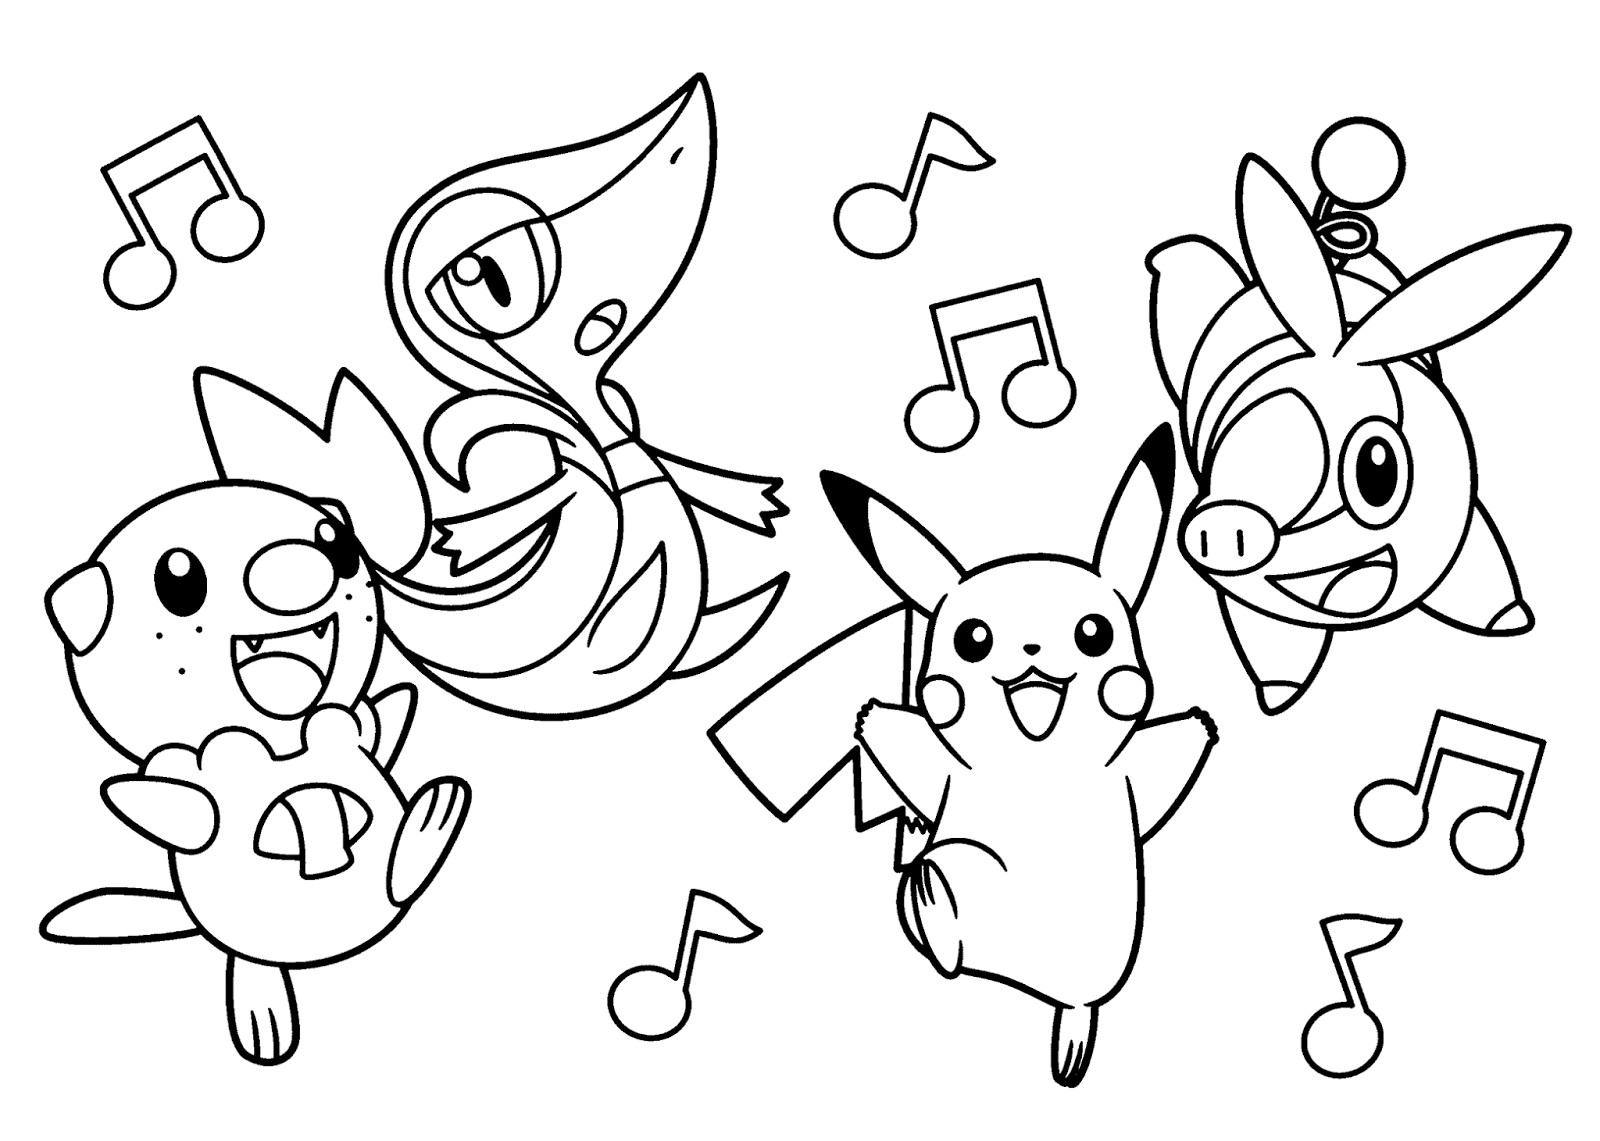 Kids Coloring Pages Pokemon
 Free Pokemon Coloring Pages For Kids 2016